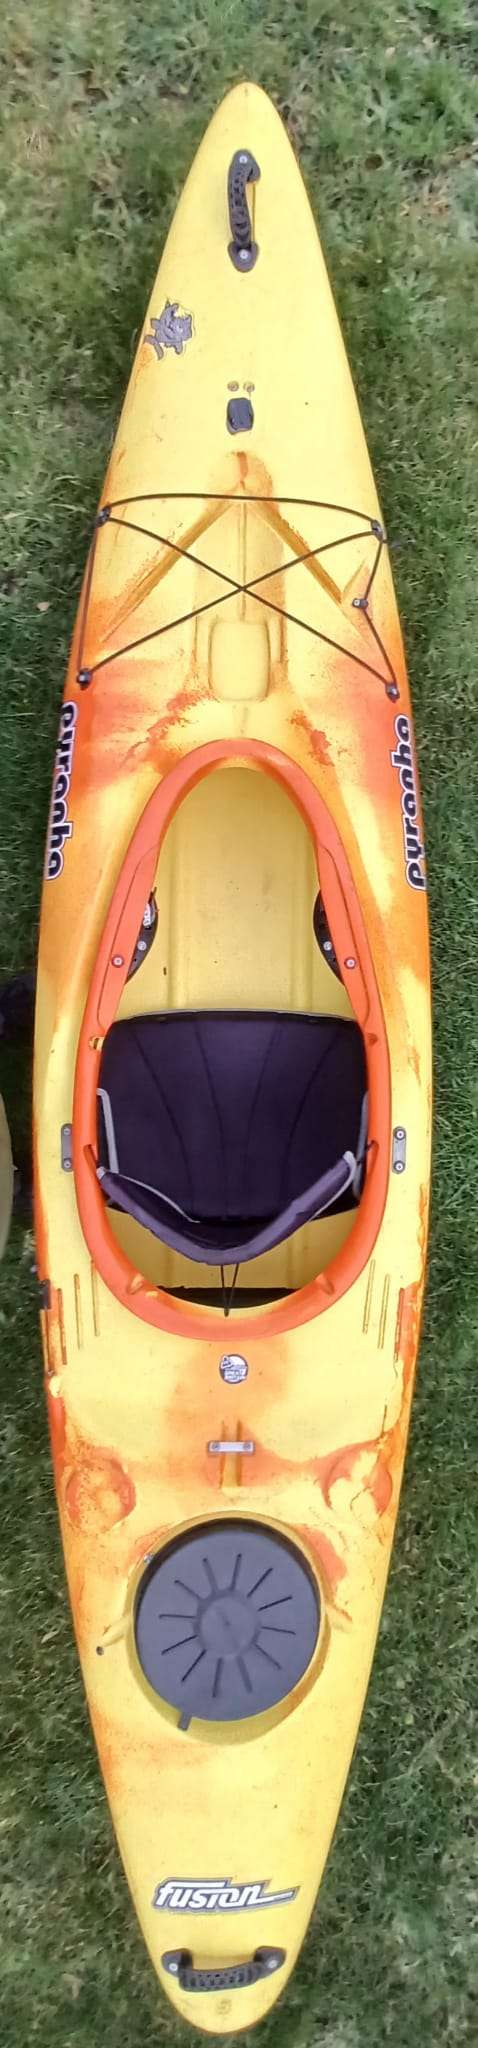 An inflatable kayak on grass

Description automatically generated